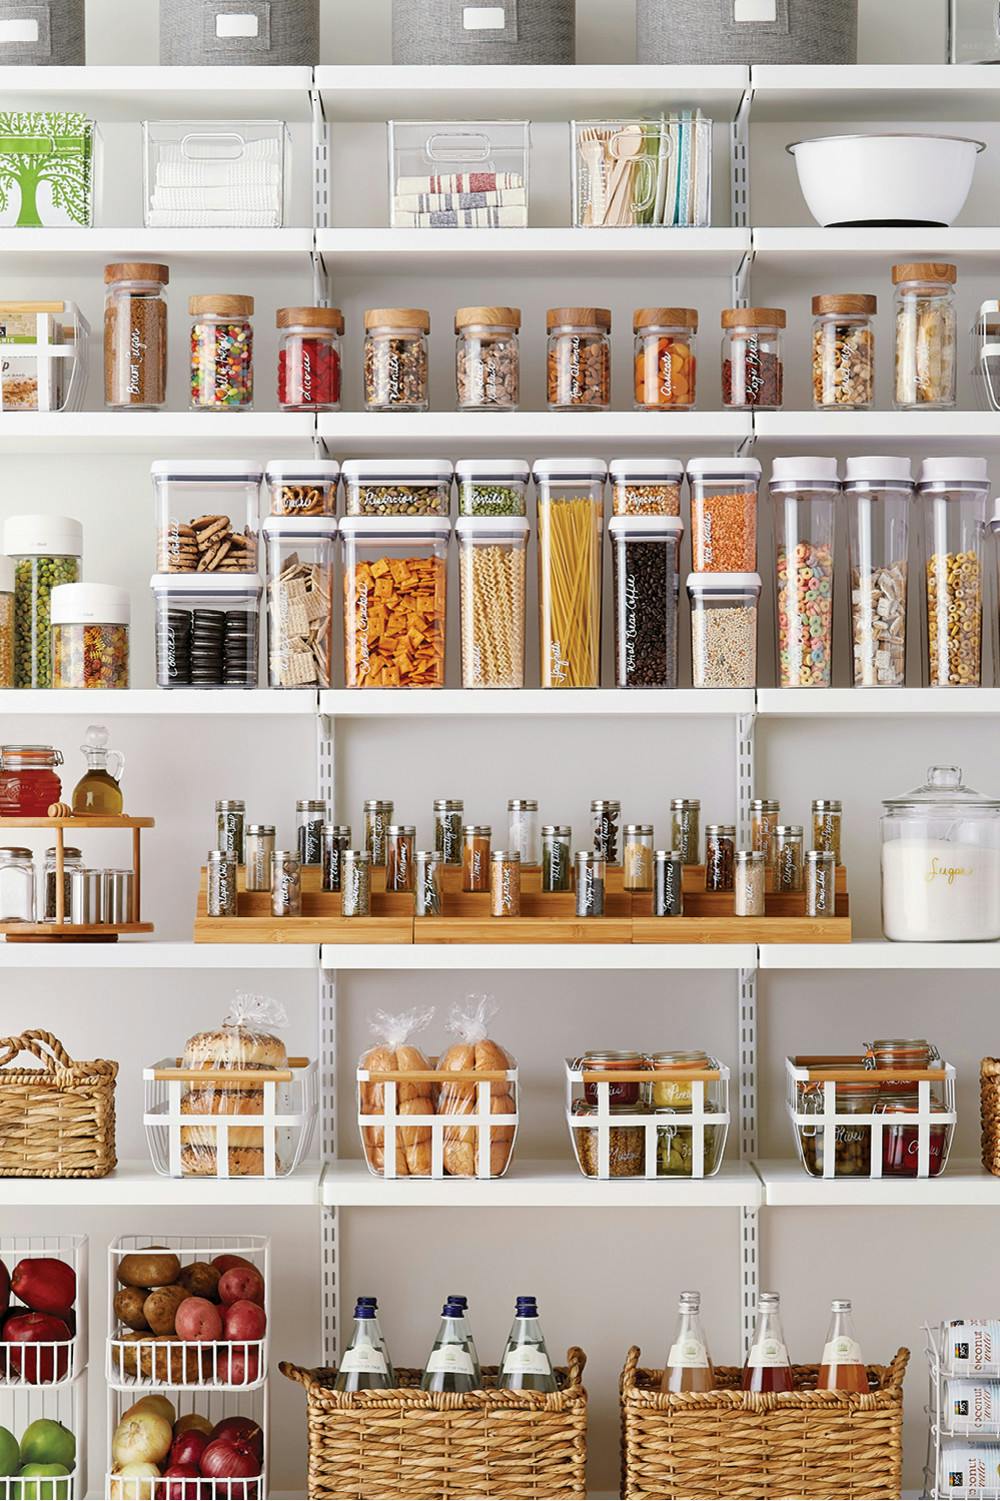 https://images.prismic.io/containerstoriesproduction/1ffdd2ea55593129deeba2deb1868c9c5ab2e63f_bl_17_pantry_organization_oxo_2.jpg?auto=compress,format